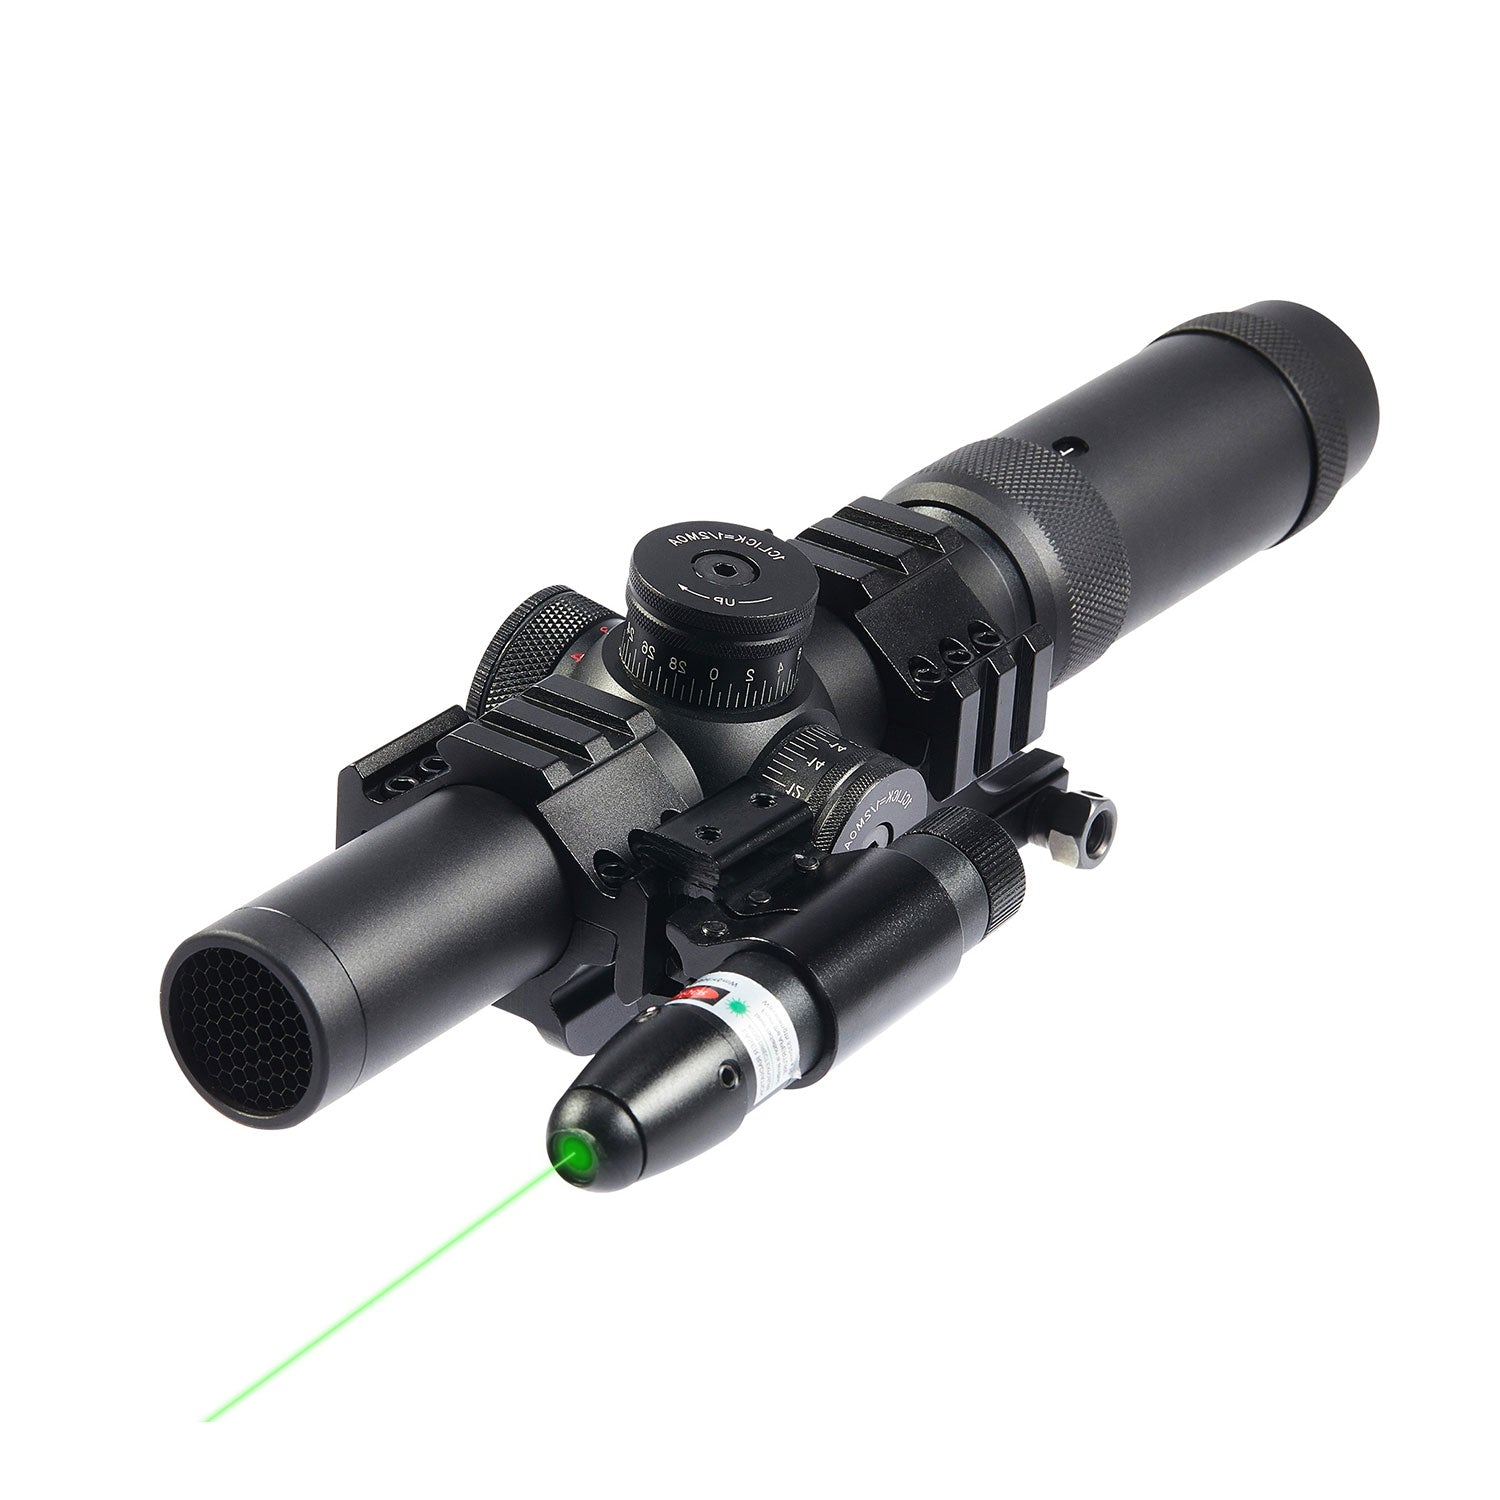 1-5x24 SFP Rifle Scope Combo with Green Laser Sight for Long Guns & Handguns, Spotting Scope for Airsoft Rifle Scope